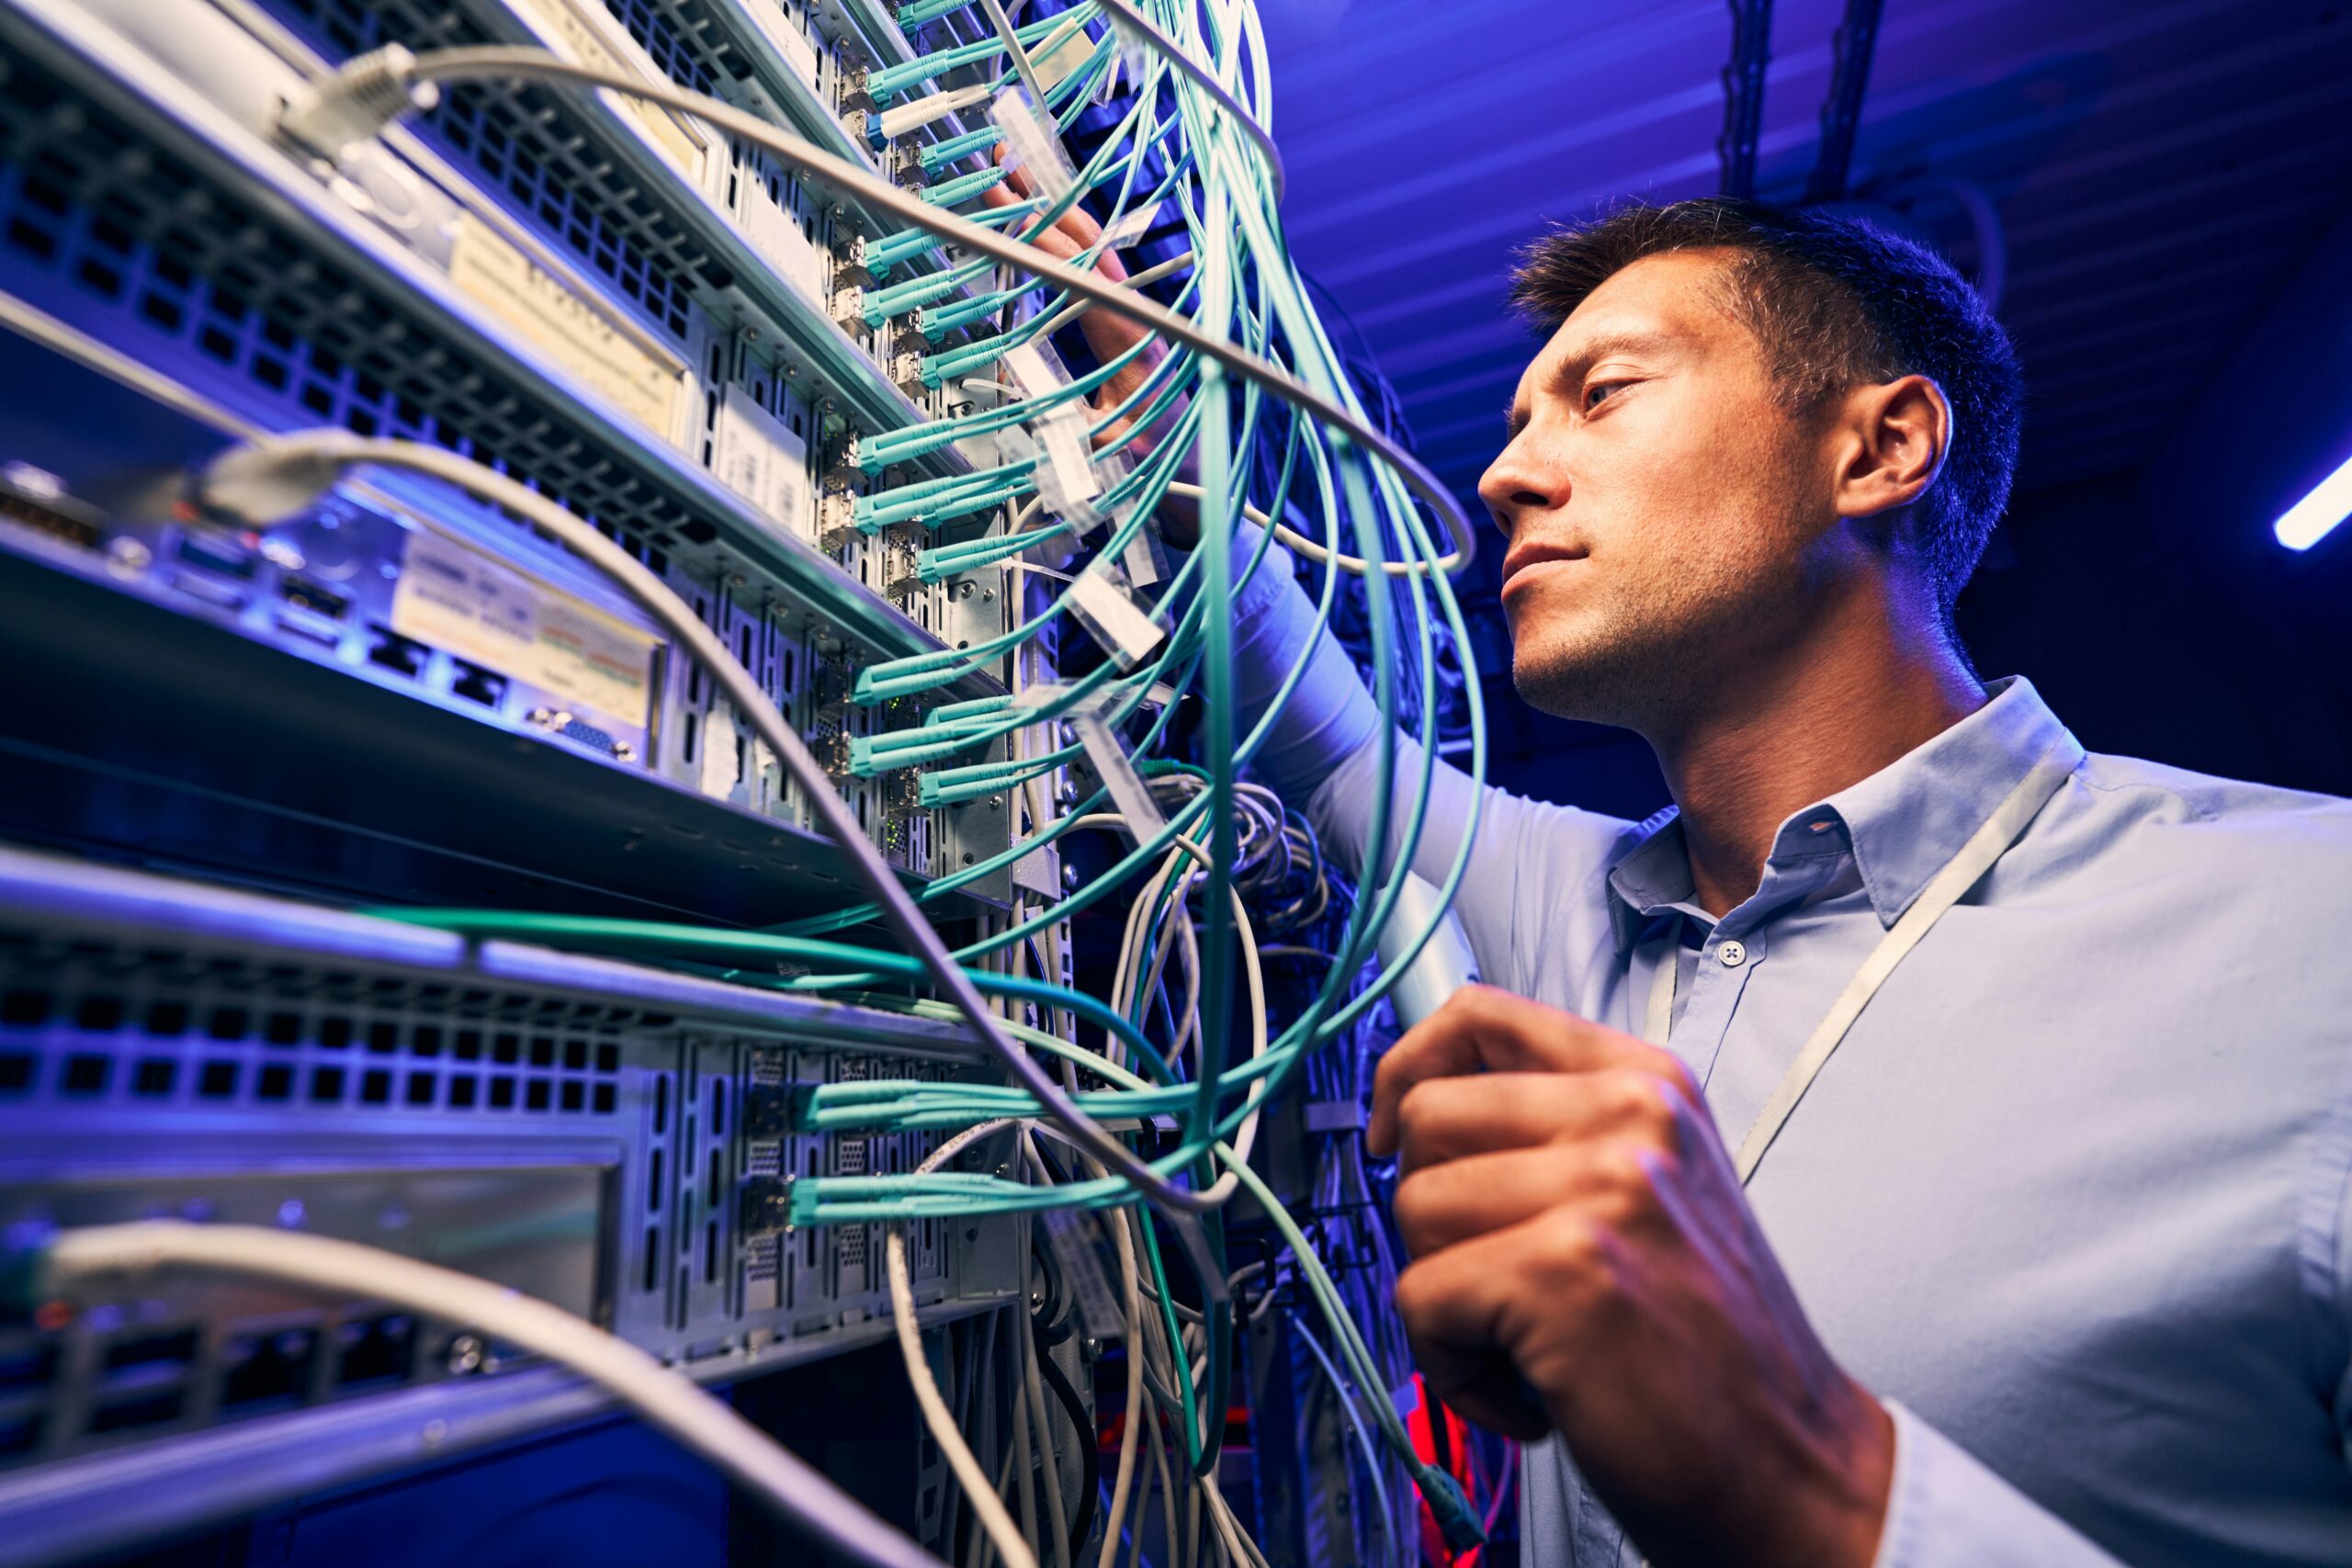 A technician examines network cables in a server room, focusing on diagnosing connectivity issues related to the service provider.